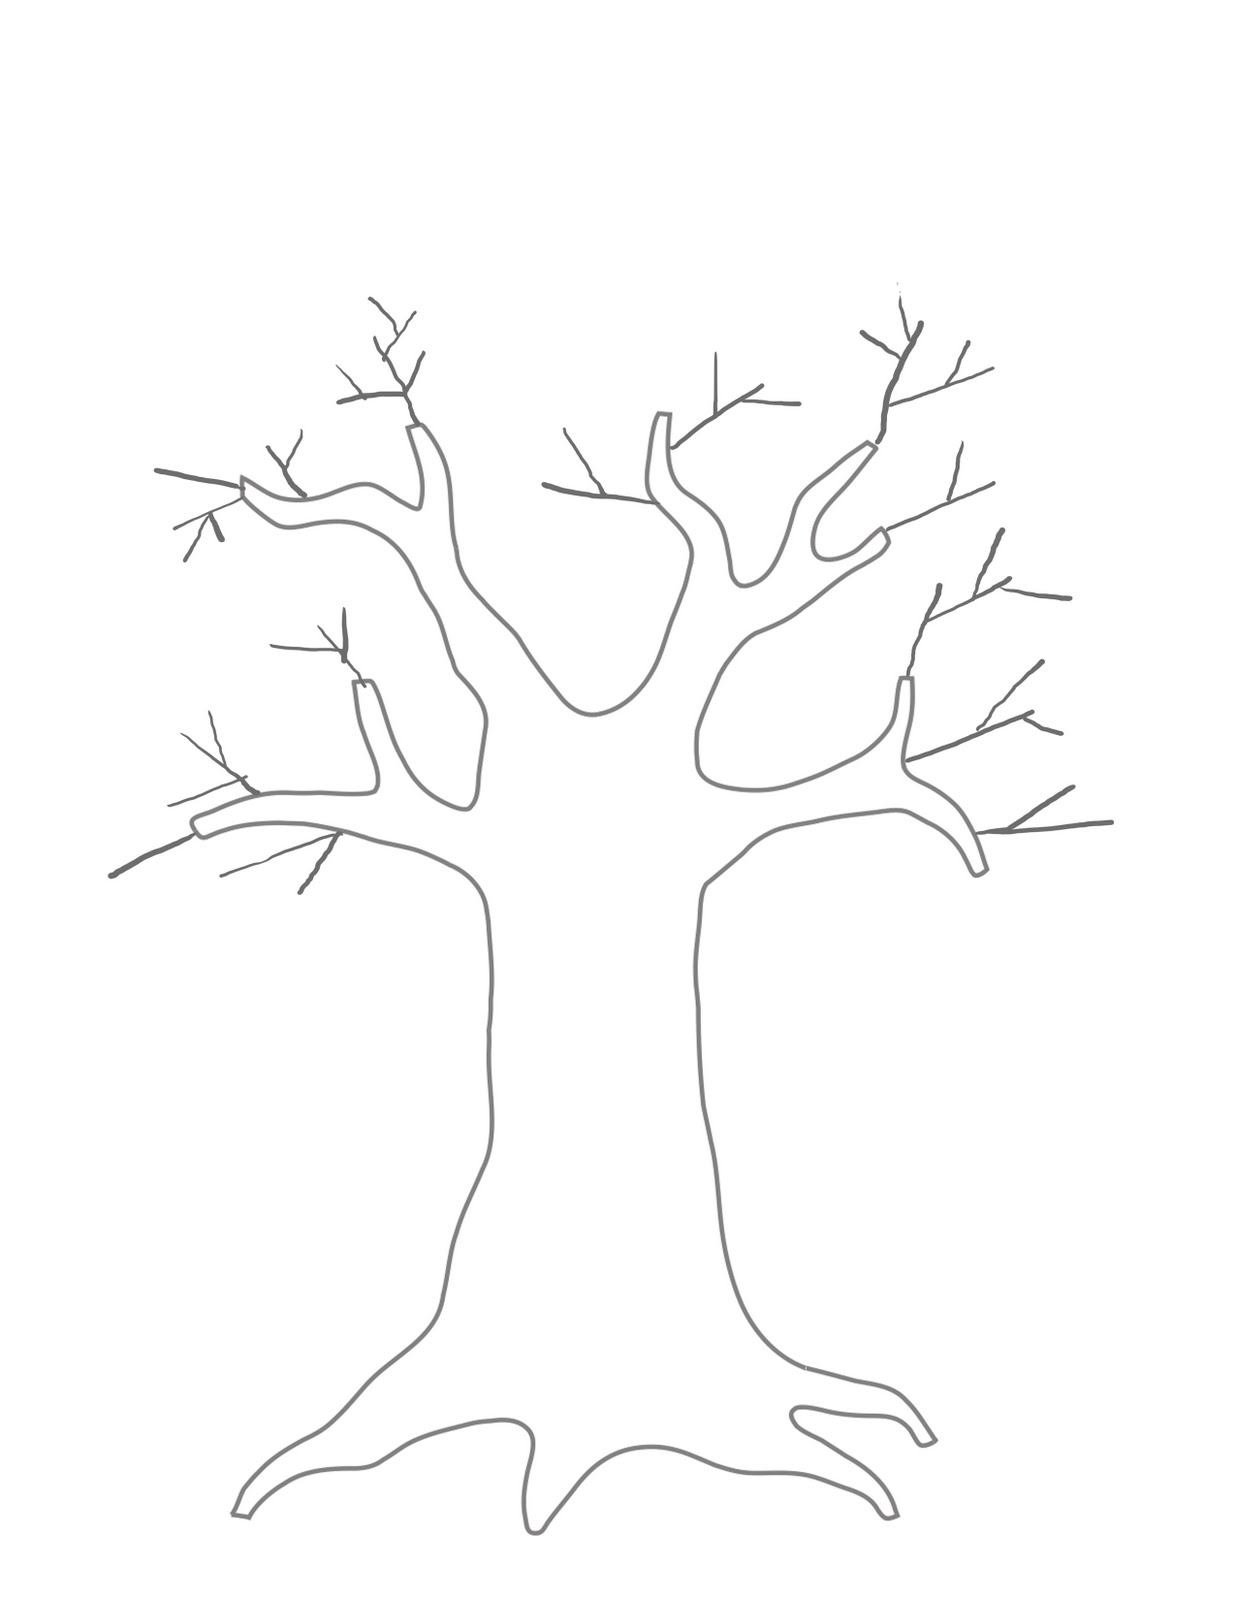 Tree Trunk Line Drawing at GetDrawings Free download